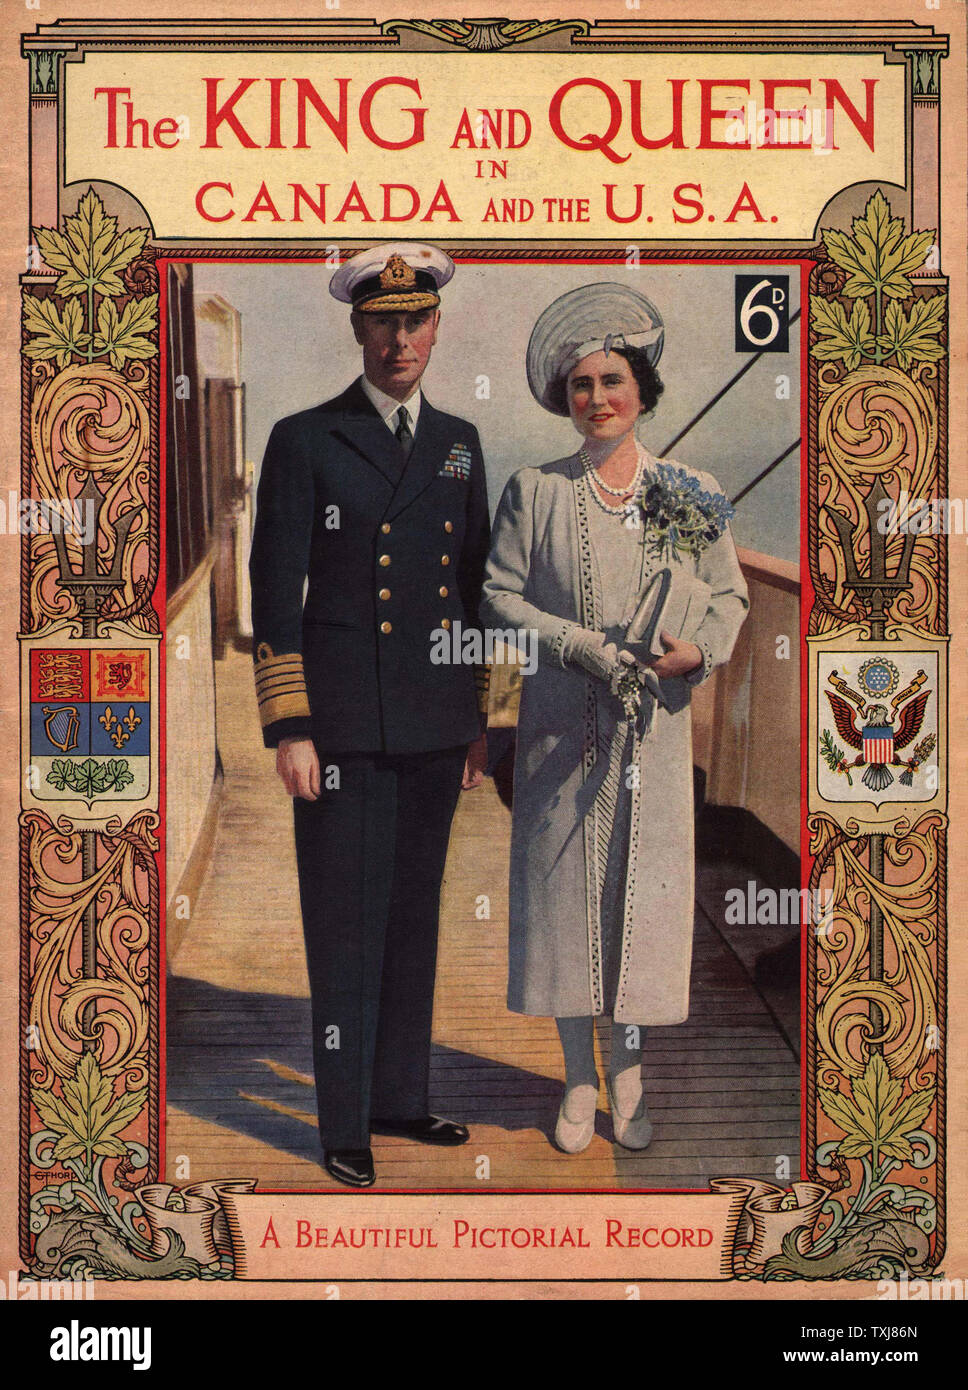 1939 The King and Queen in Canada and the USA, King George VI & Queen Elizabeth Royal Tour in Canada Stock Photo